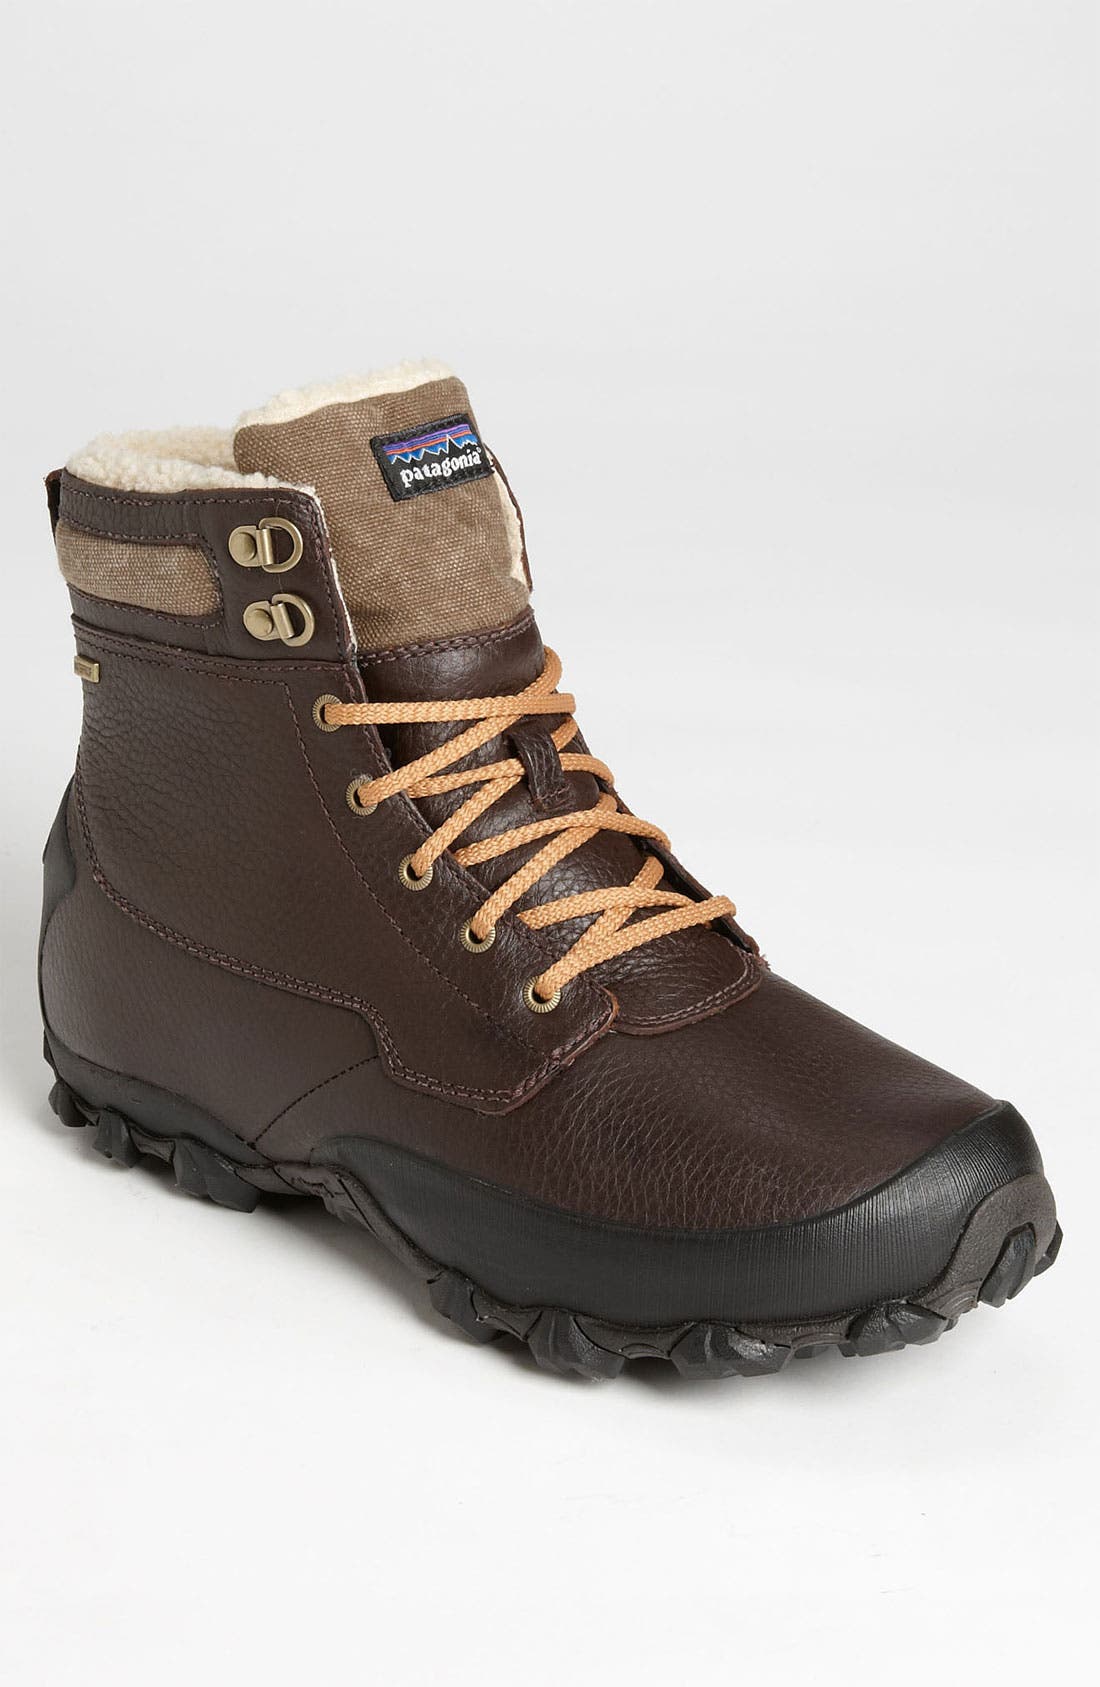 patagonia boots winter